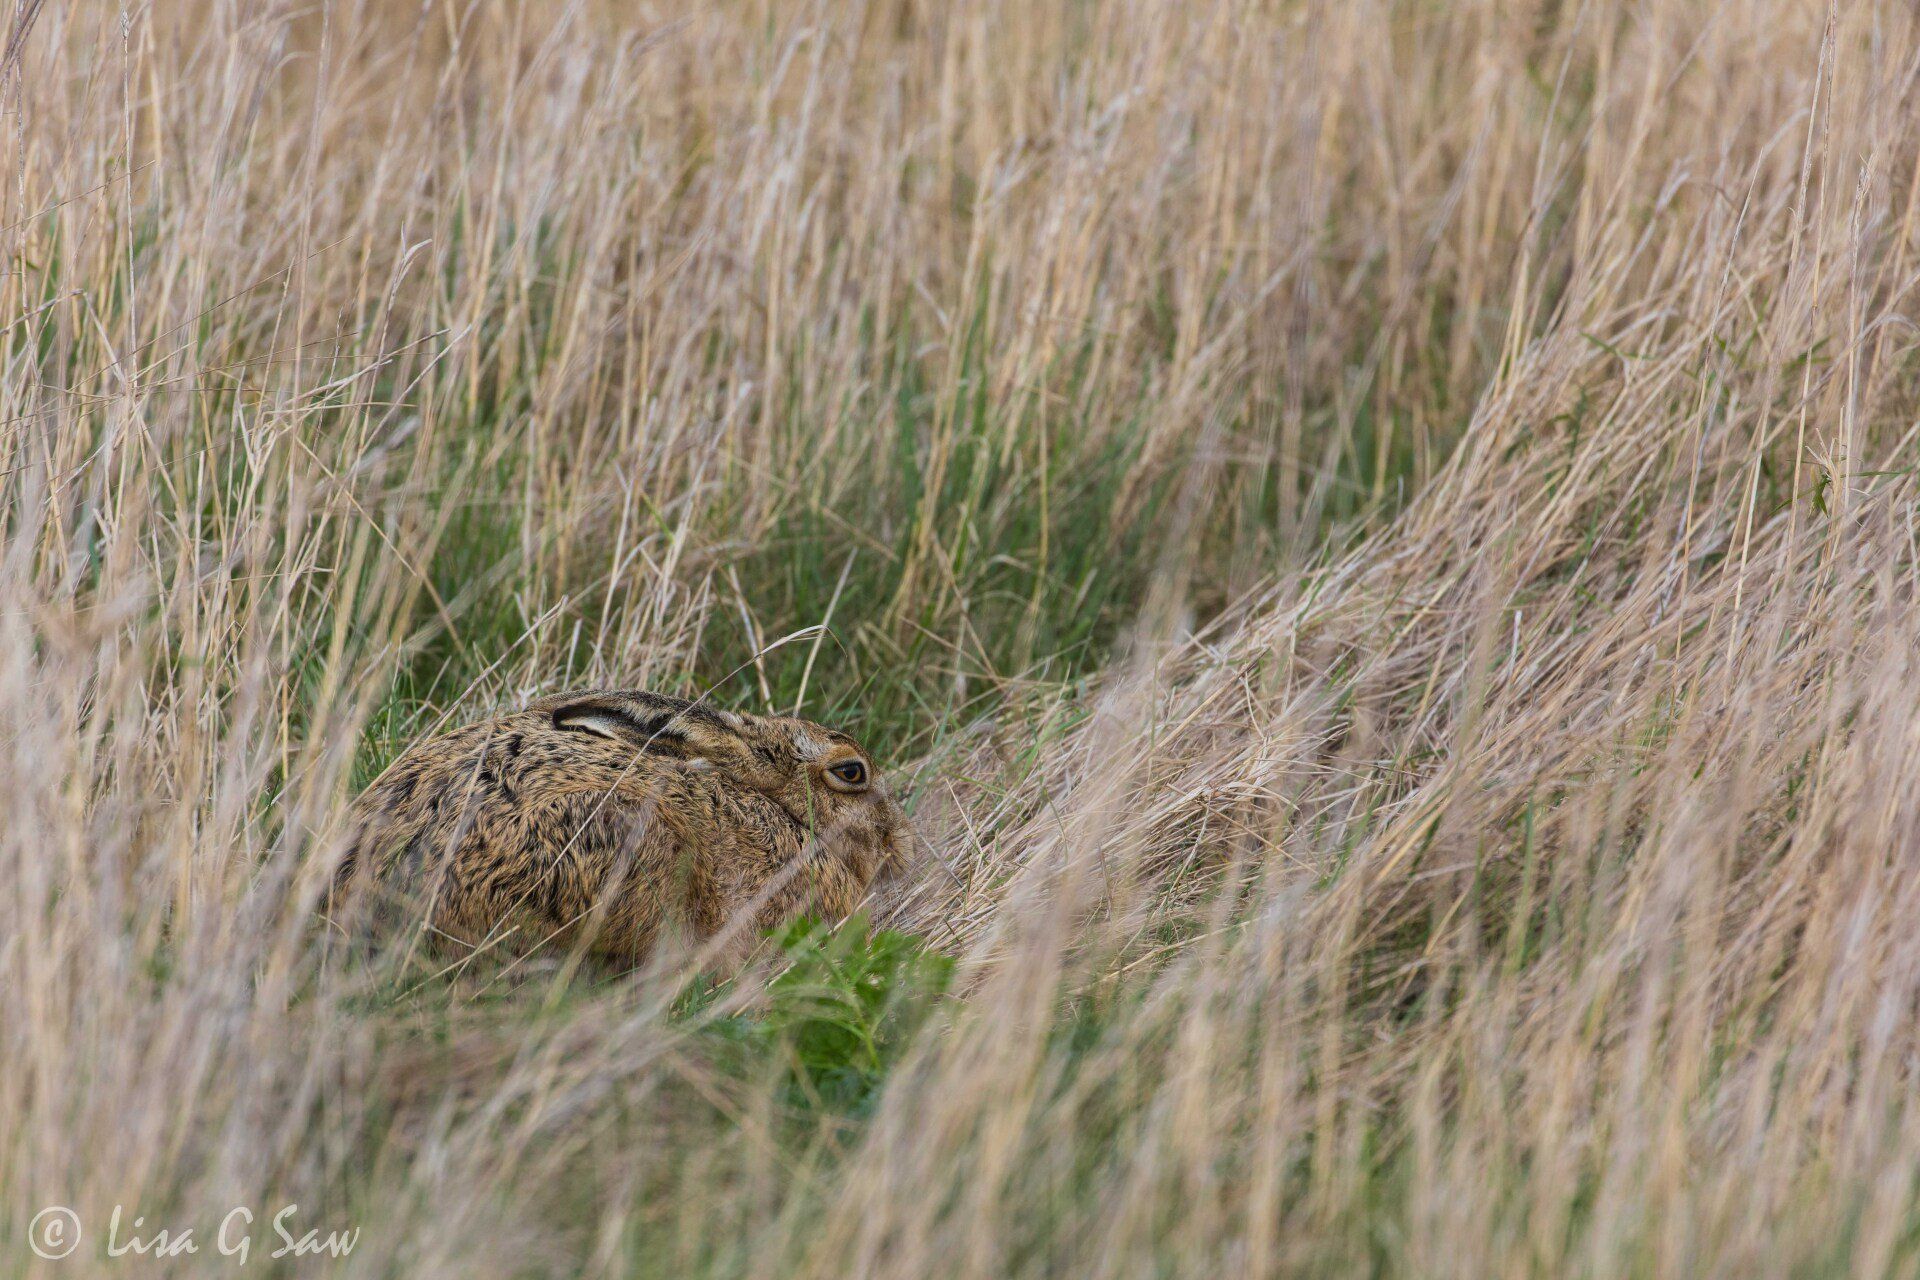 Hare hunkered down in tall grass